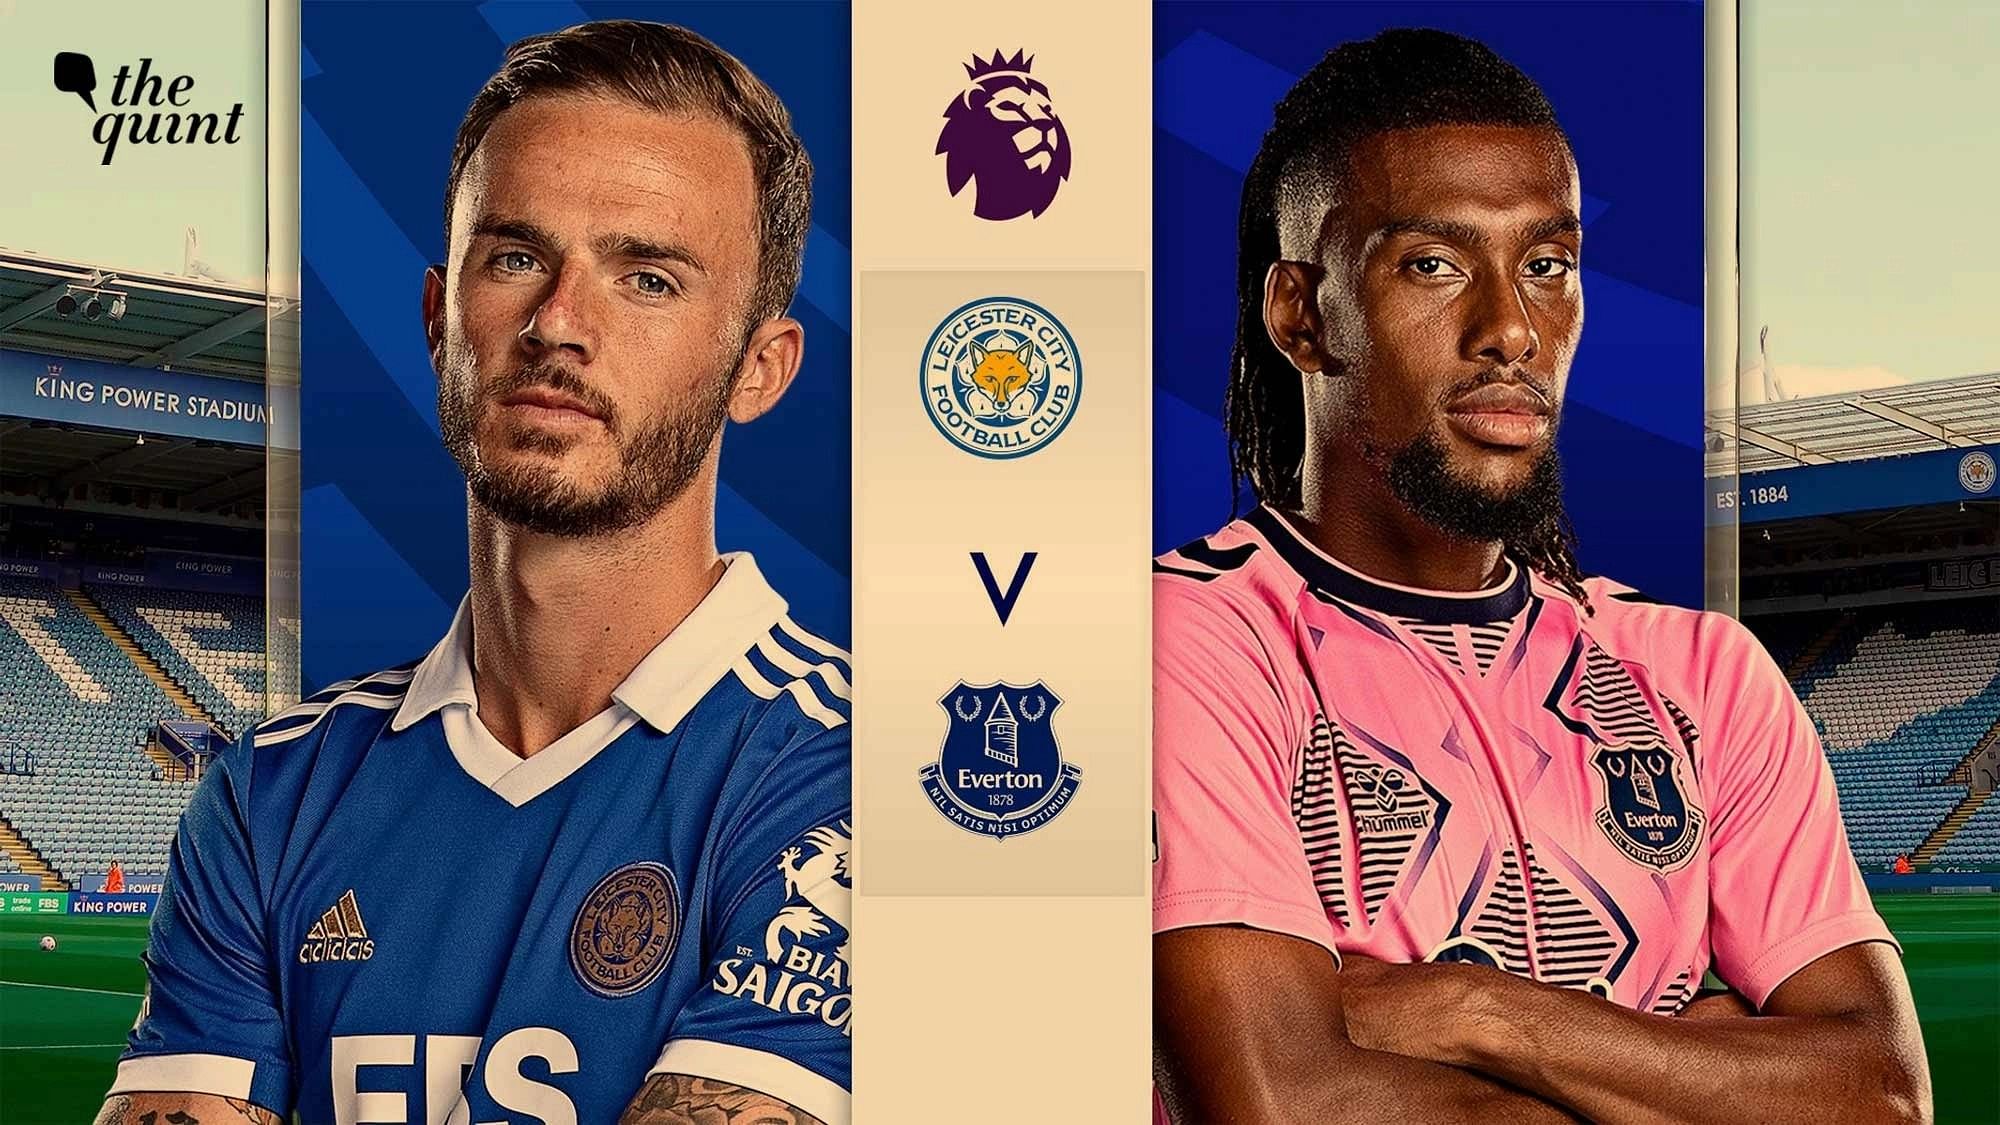 Leicester City vs Everton Live Telecast and Live Streaming Where to watch online, TV channels and kick-off India time